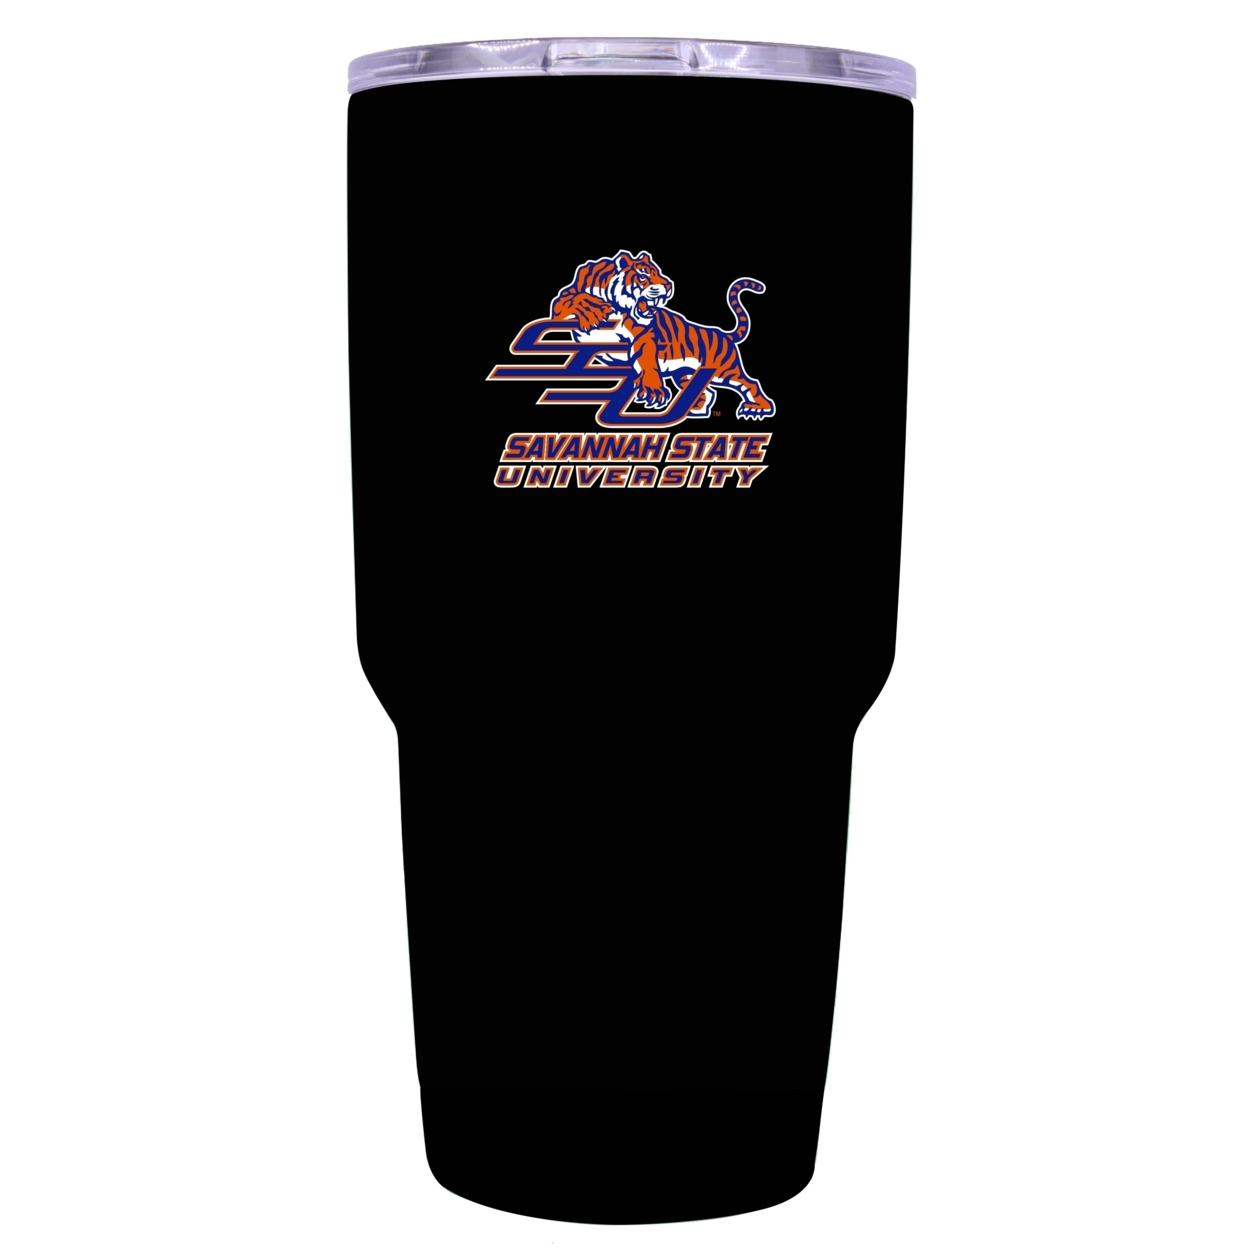 Savannah State University 24 Oz Insulated Stainless Steel Tumbler Choose Your Color.